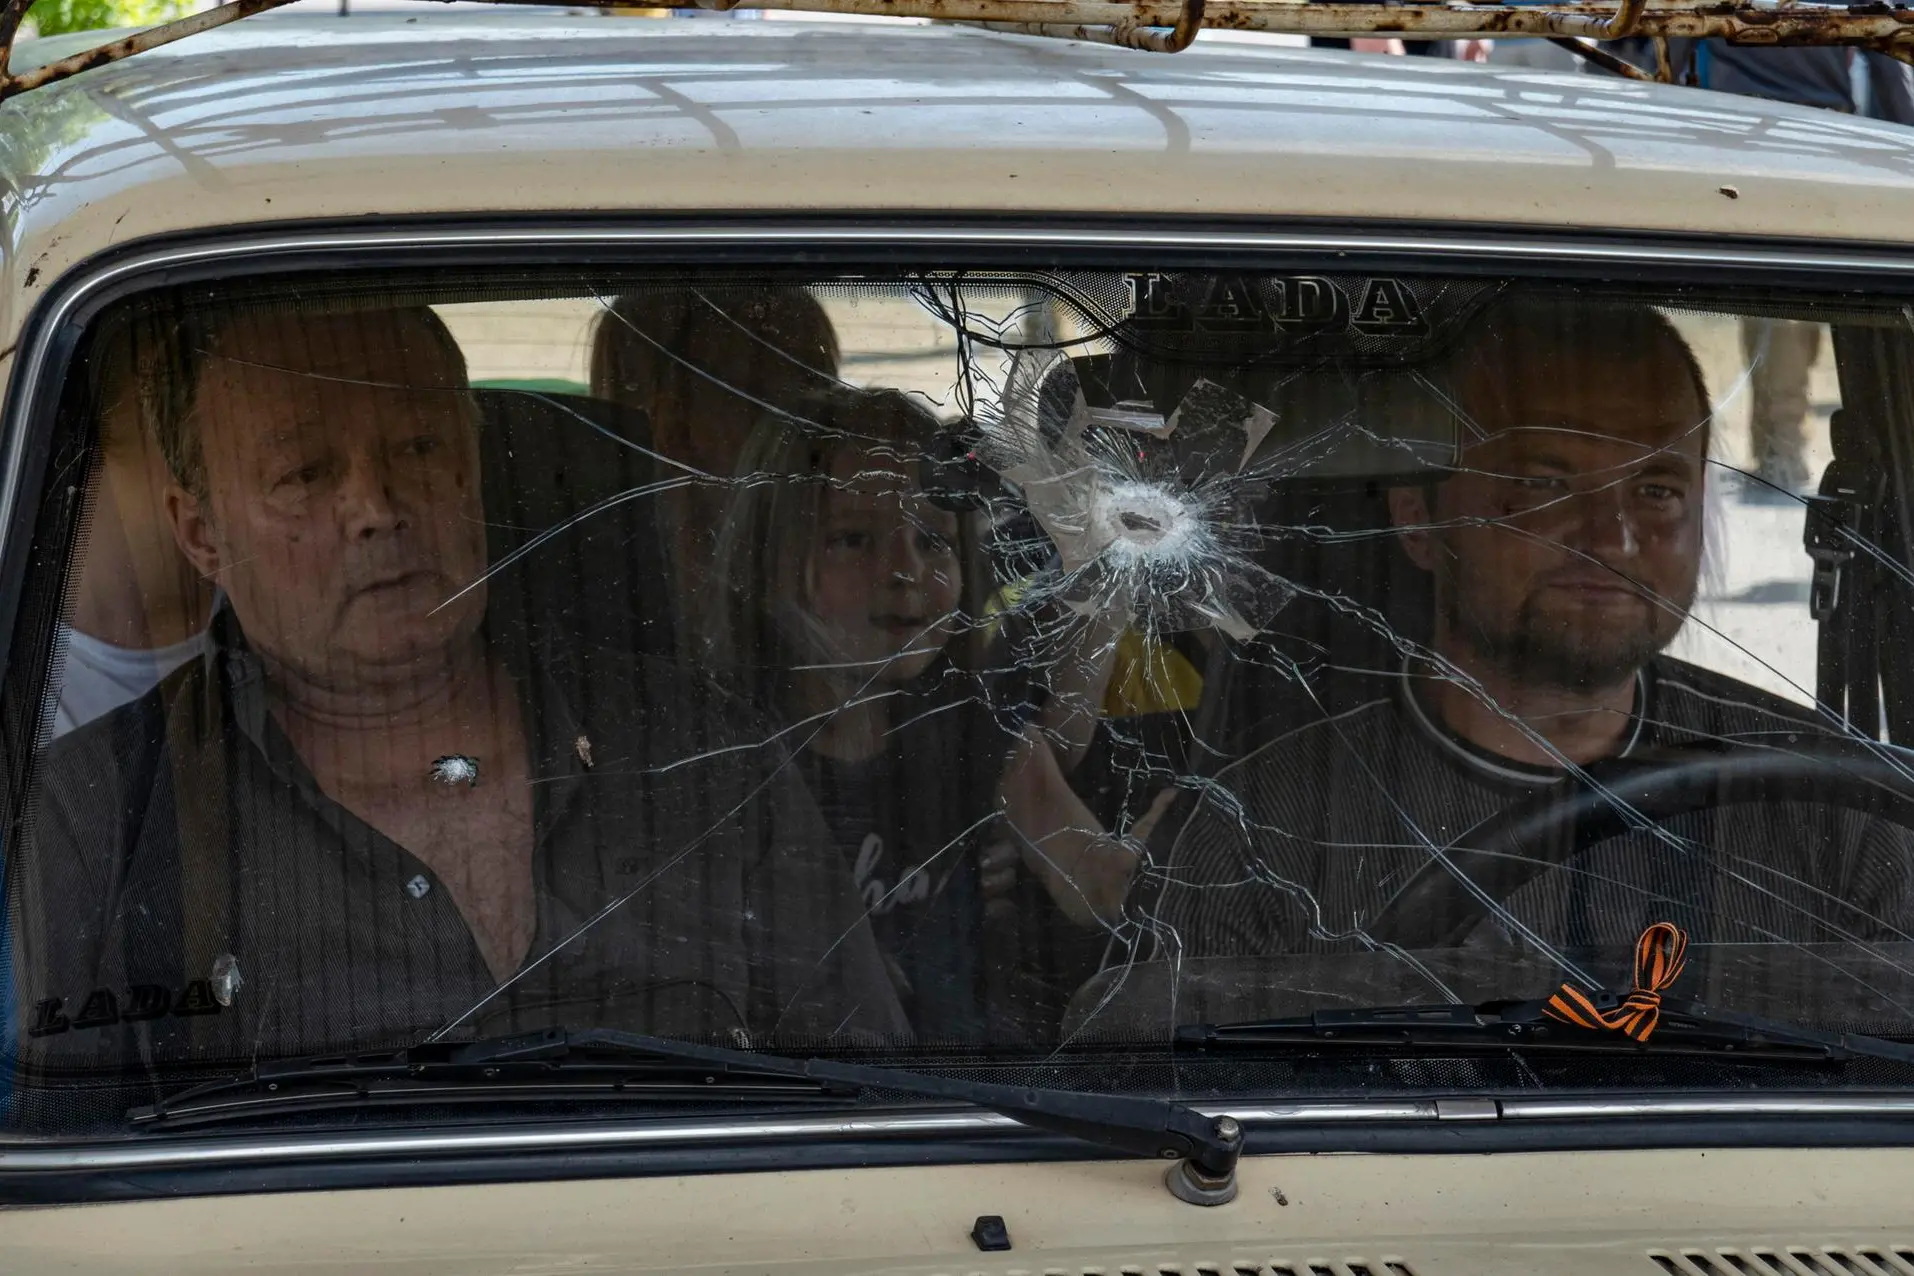 epa10010059 A picture taken during a visit to Mariupol organized by the Russian military shows a local family drives on a car with a broken windshield in Mariupol, Ukraine, 12 June 2022. Russian Defense Minister Sergei Shoigu said 'In Mariupol, water and electricity supply to residential areas is gradually being restored, streets are being cleared, the first social facilities have begun to function.' On 24 February Russian troops entered Ukrainian territory starting a conflict that has provoked destruction and a humanitarian crisis. According to the UNHCR, more than six million refugees have fled Ukraine, and a further 7.7 million people have been displaced internally within Ukraine since. EPA/SERGEI ILNITSKY